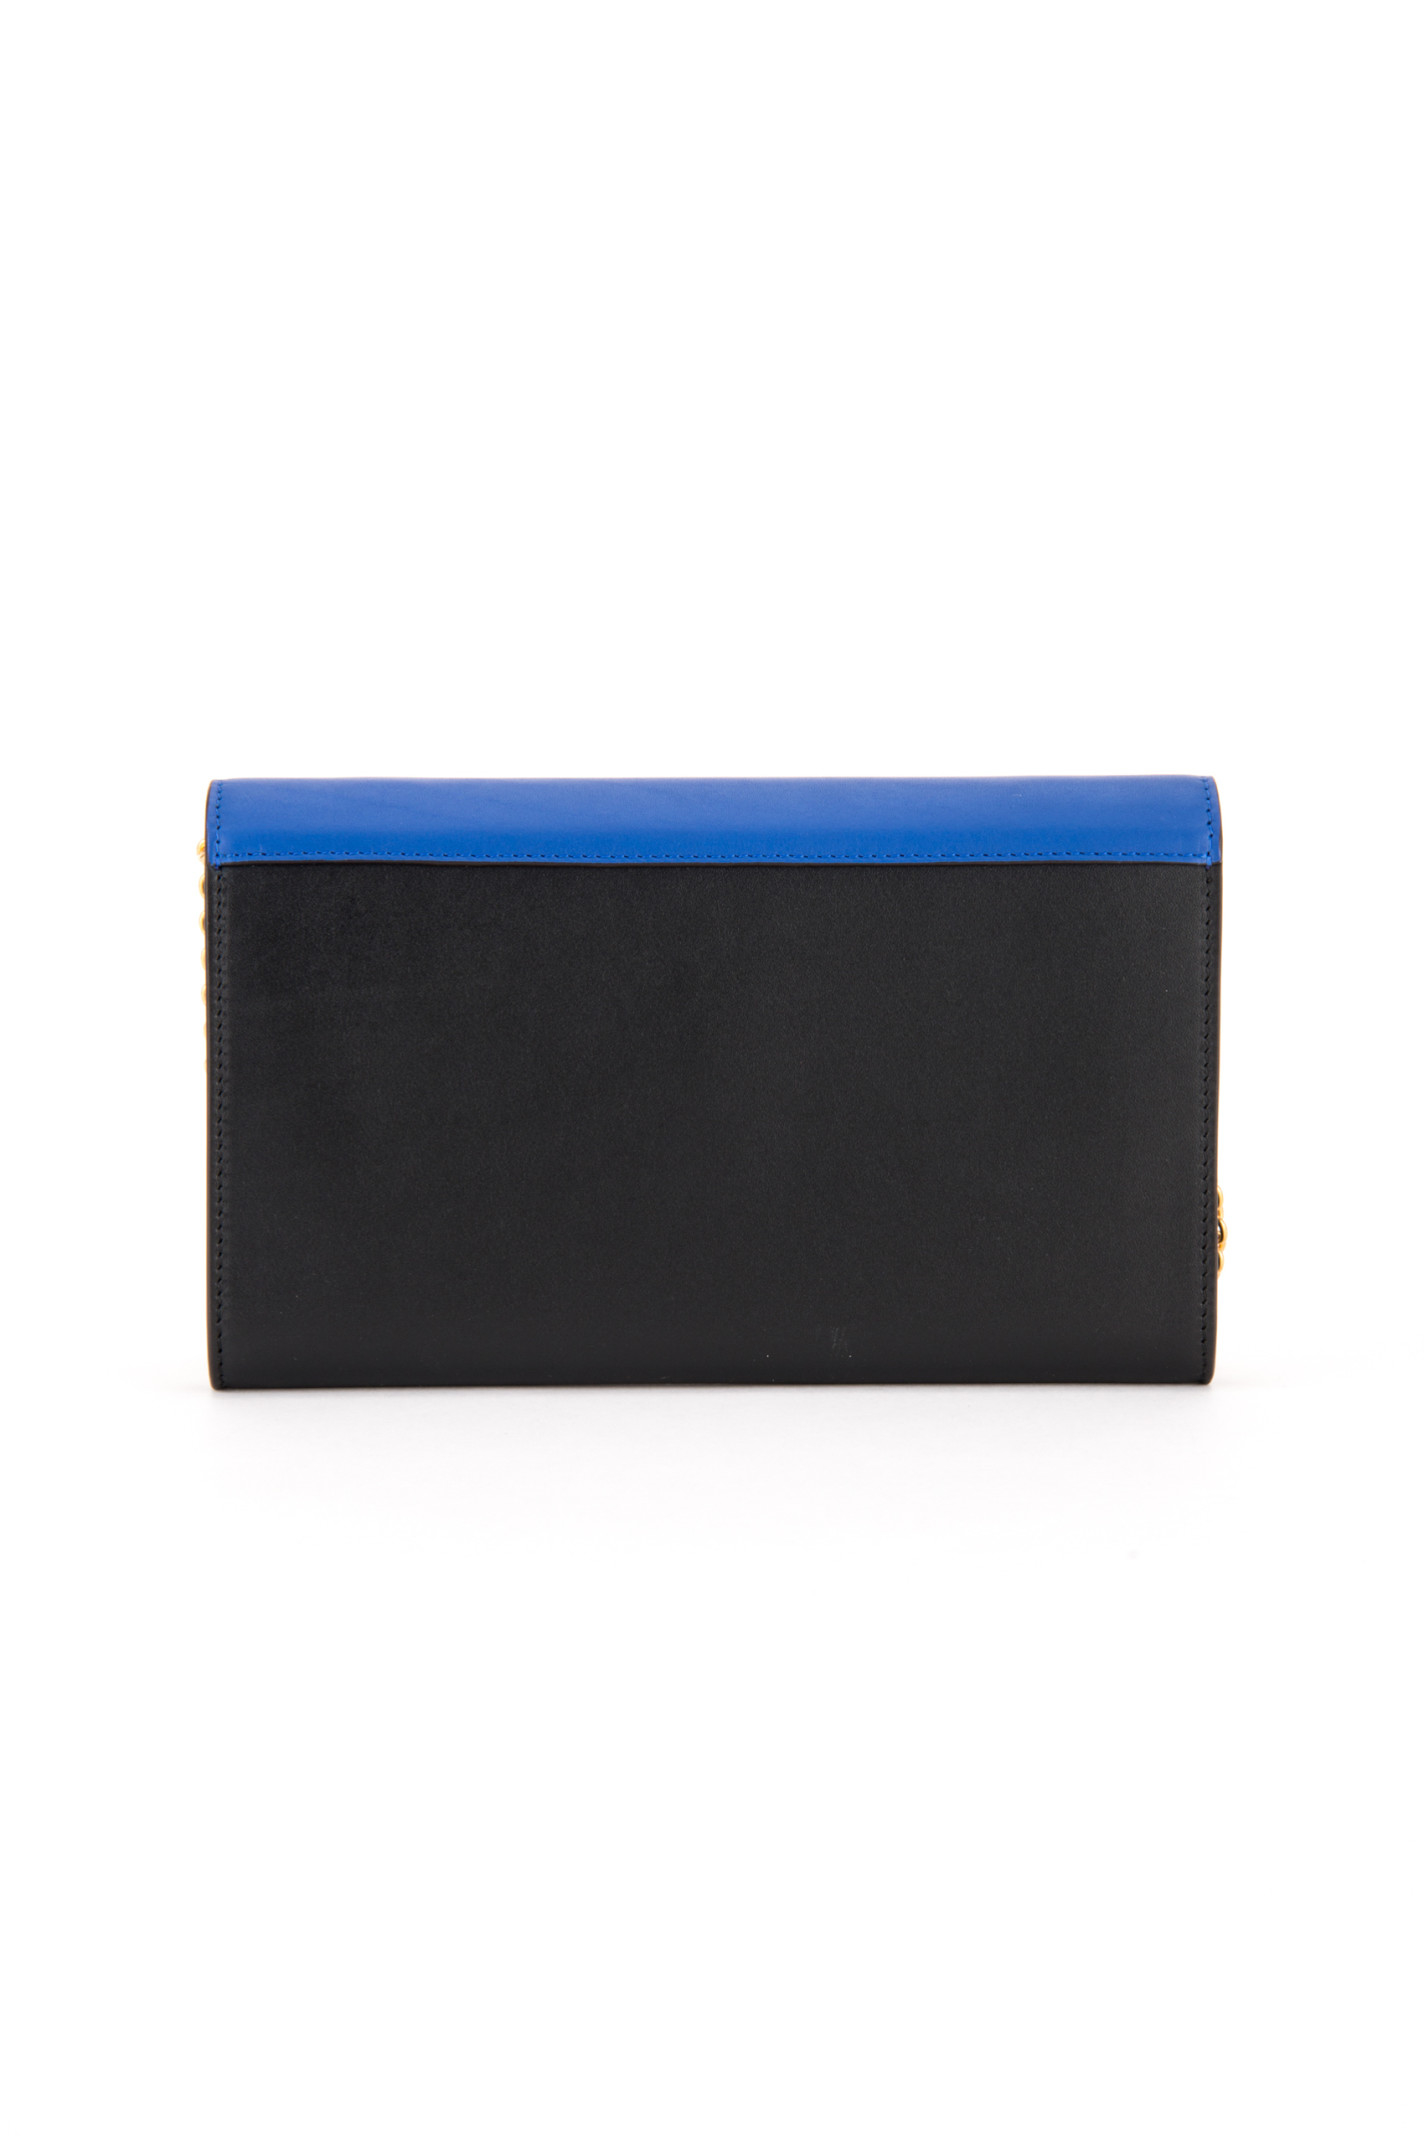 Cline Large Flap Bag With Chain in Blue (COBALT) | Lyst  